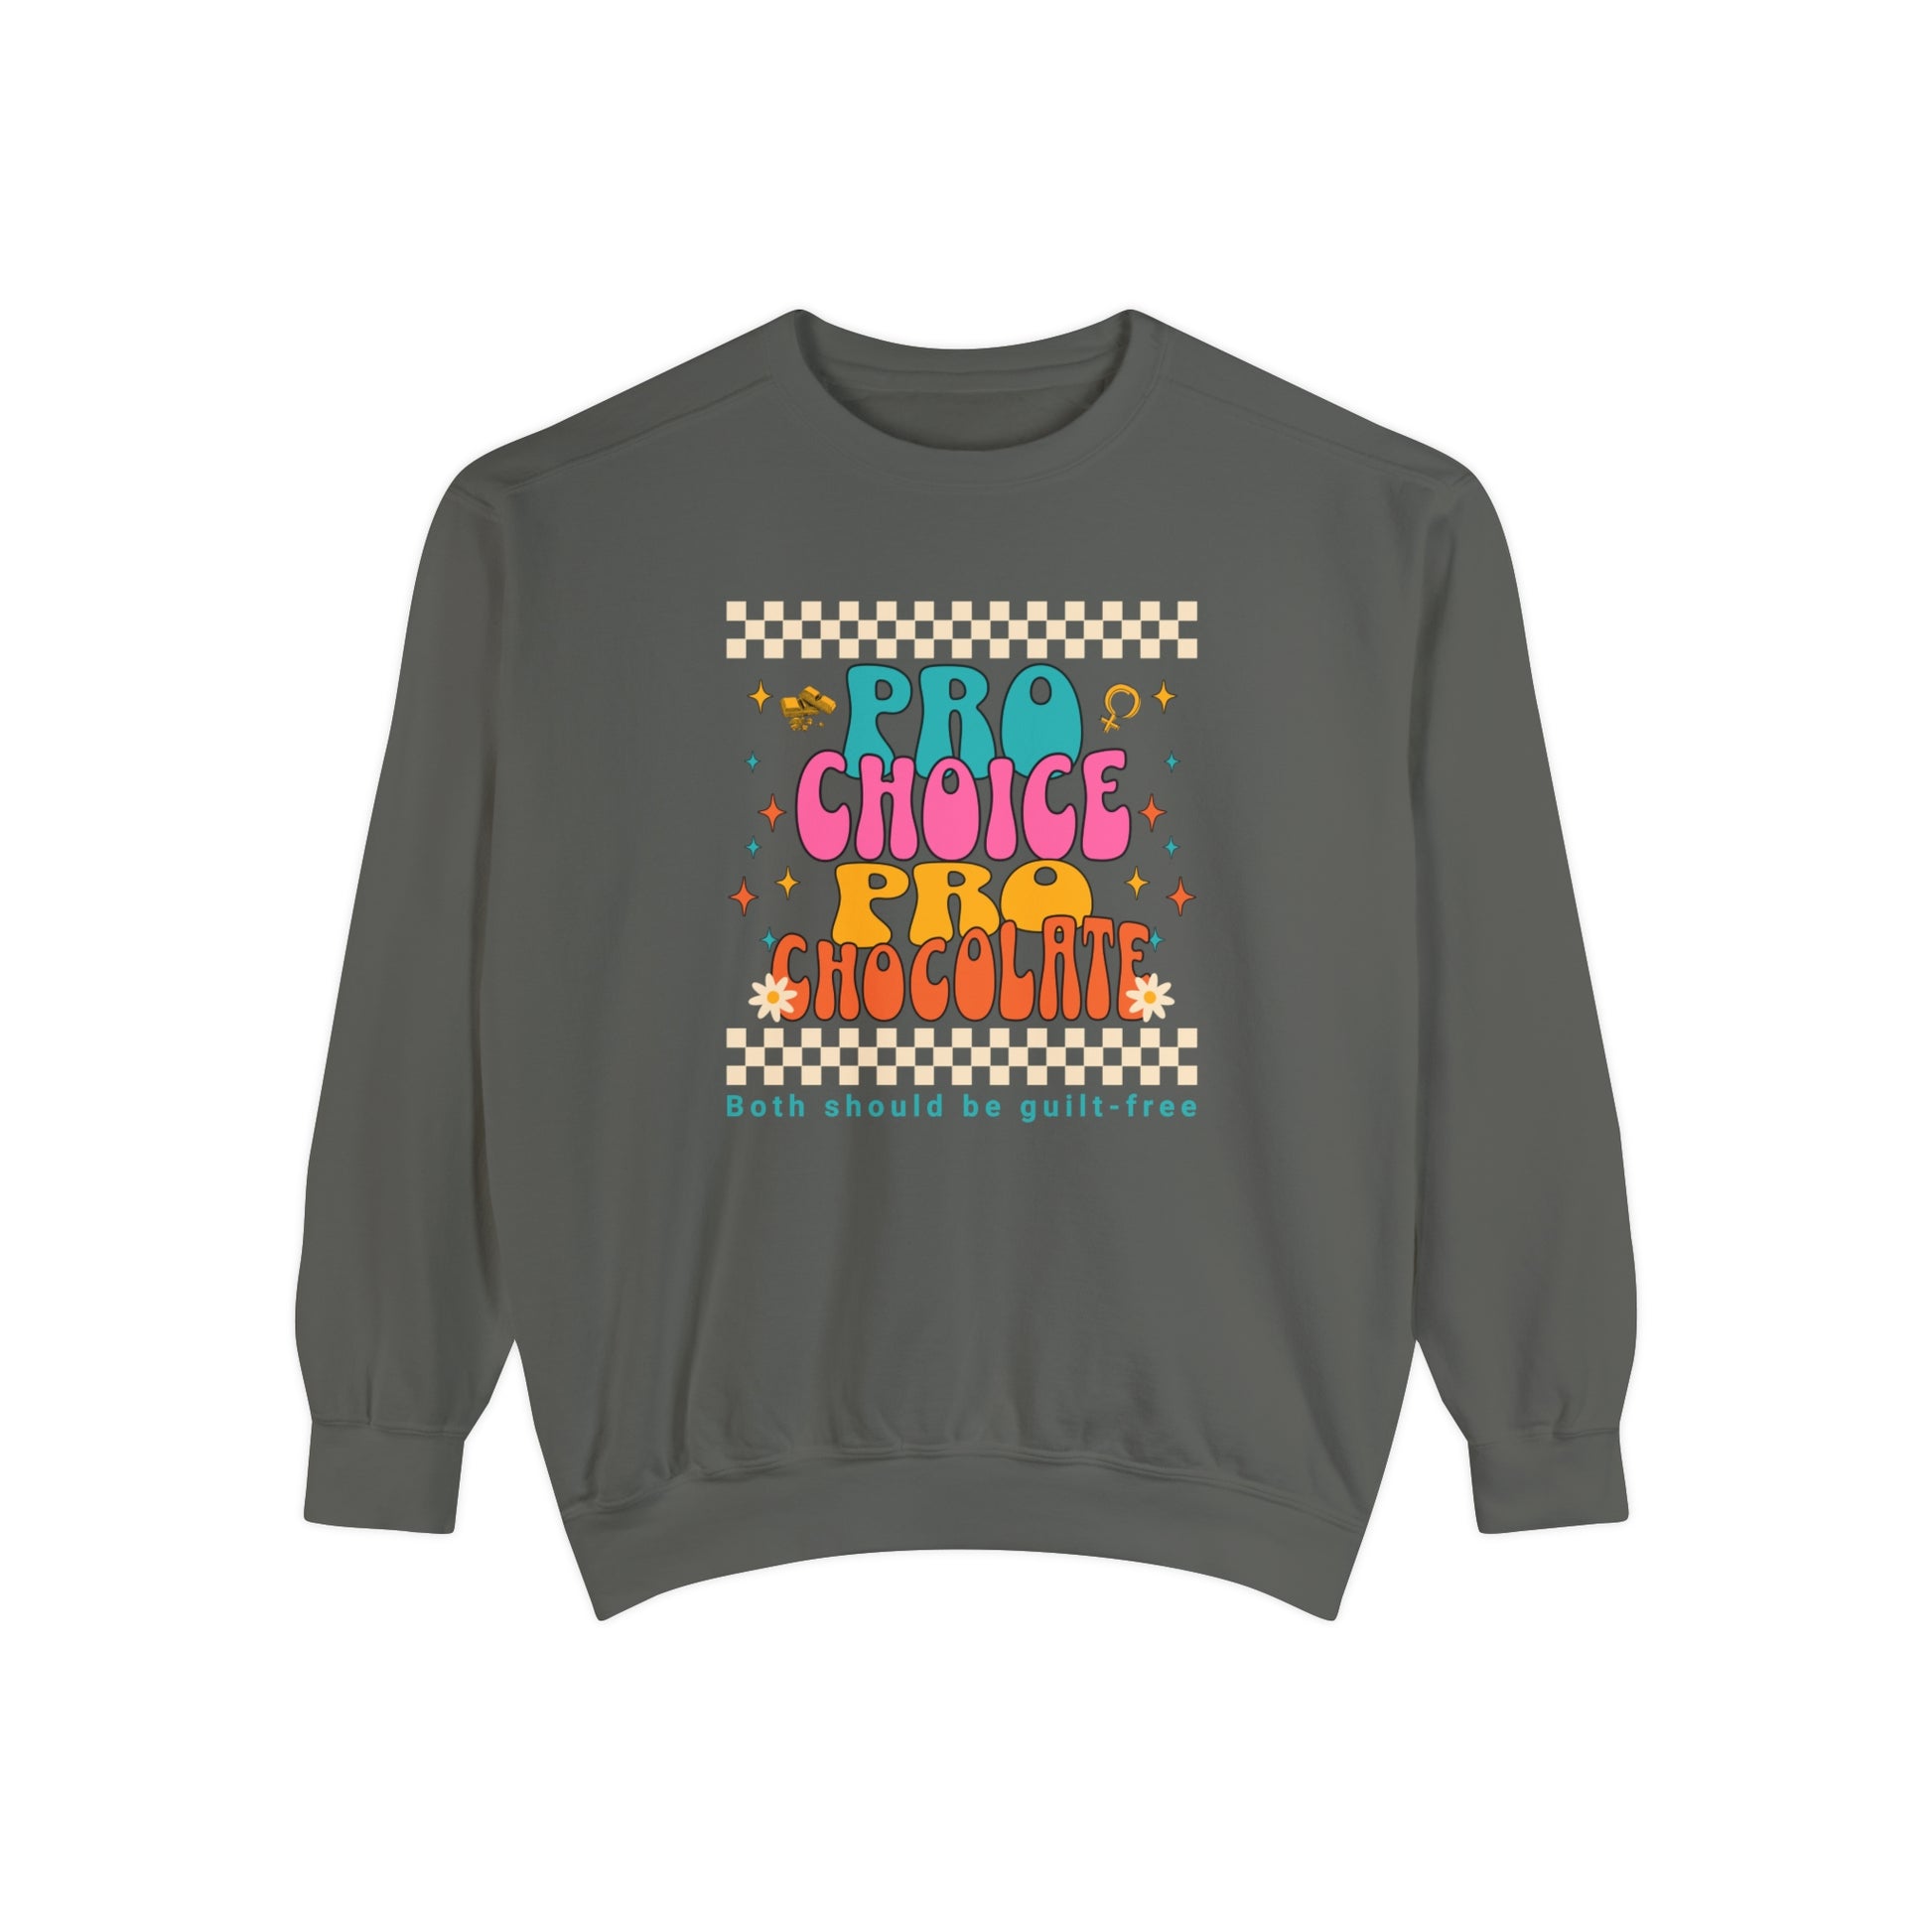 Pepper Comfort Colors 1566 Sweatshirt, sporting a colorful retro pro-choice message.